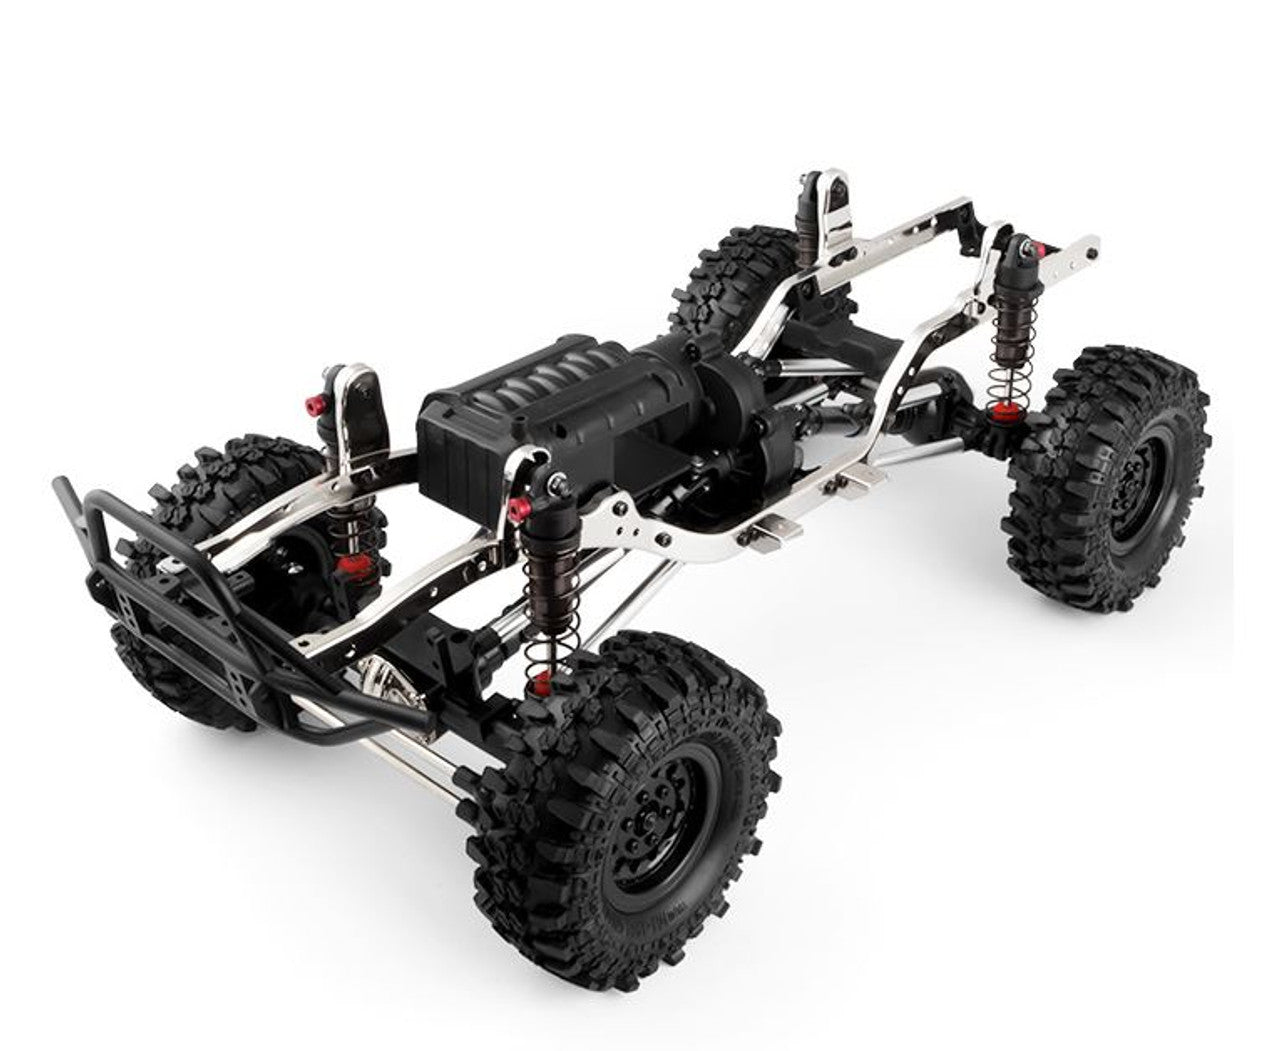 Gmade SAWBACK 4LS Off-Road Vehicle Kit 1/10 Scale  a GS01 Chassis and 4WD